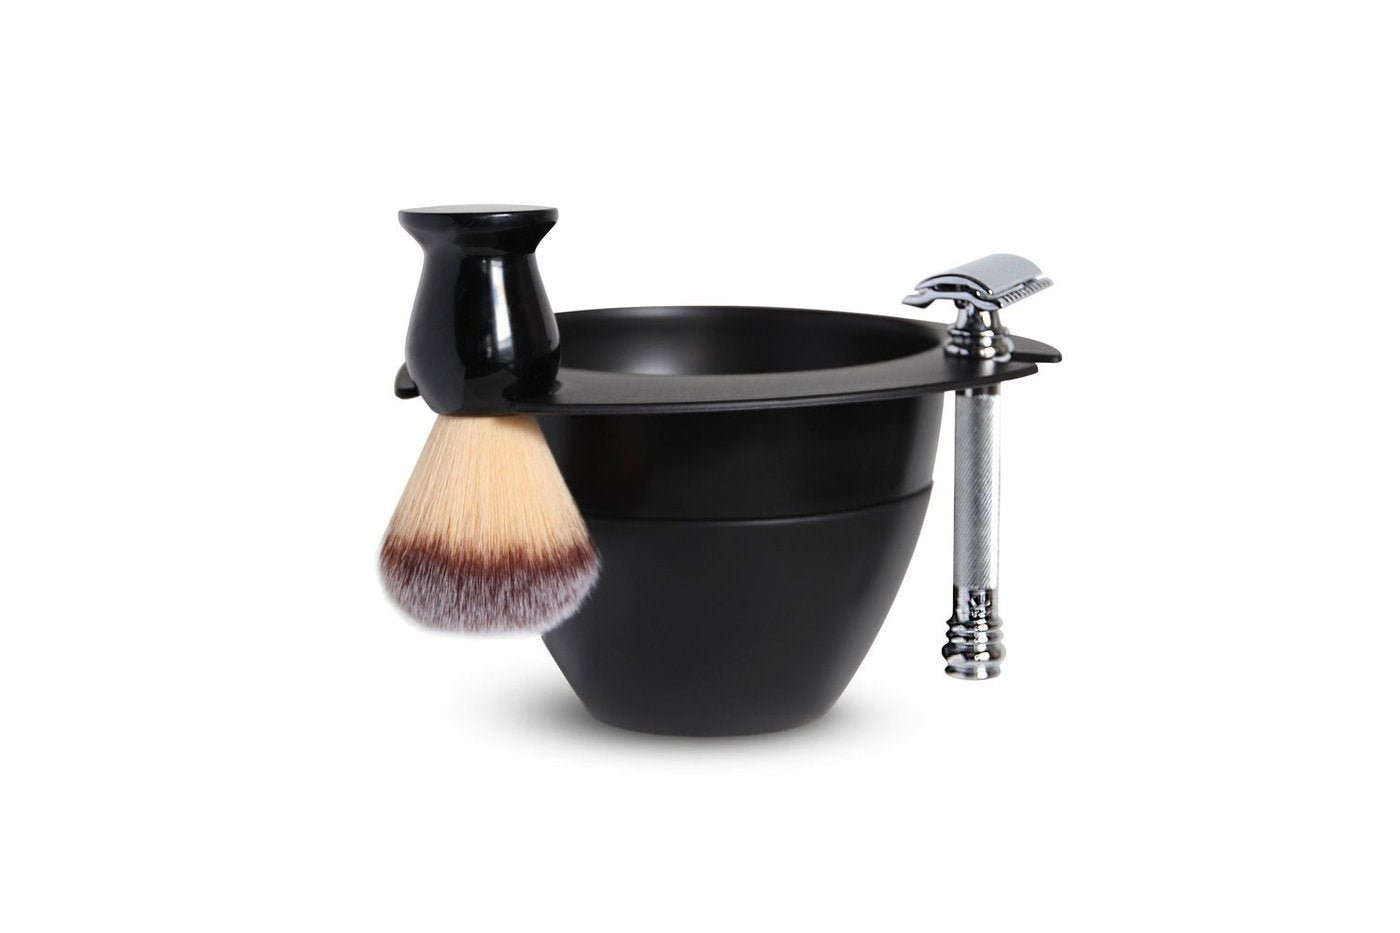 Product image 2 for Shavebowl Lather Bowl, Black